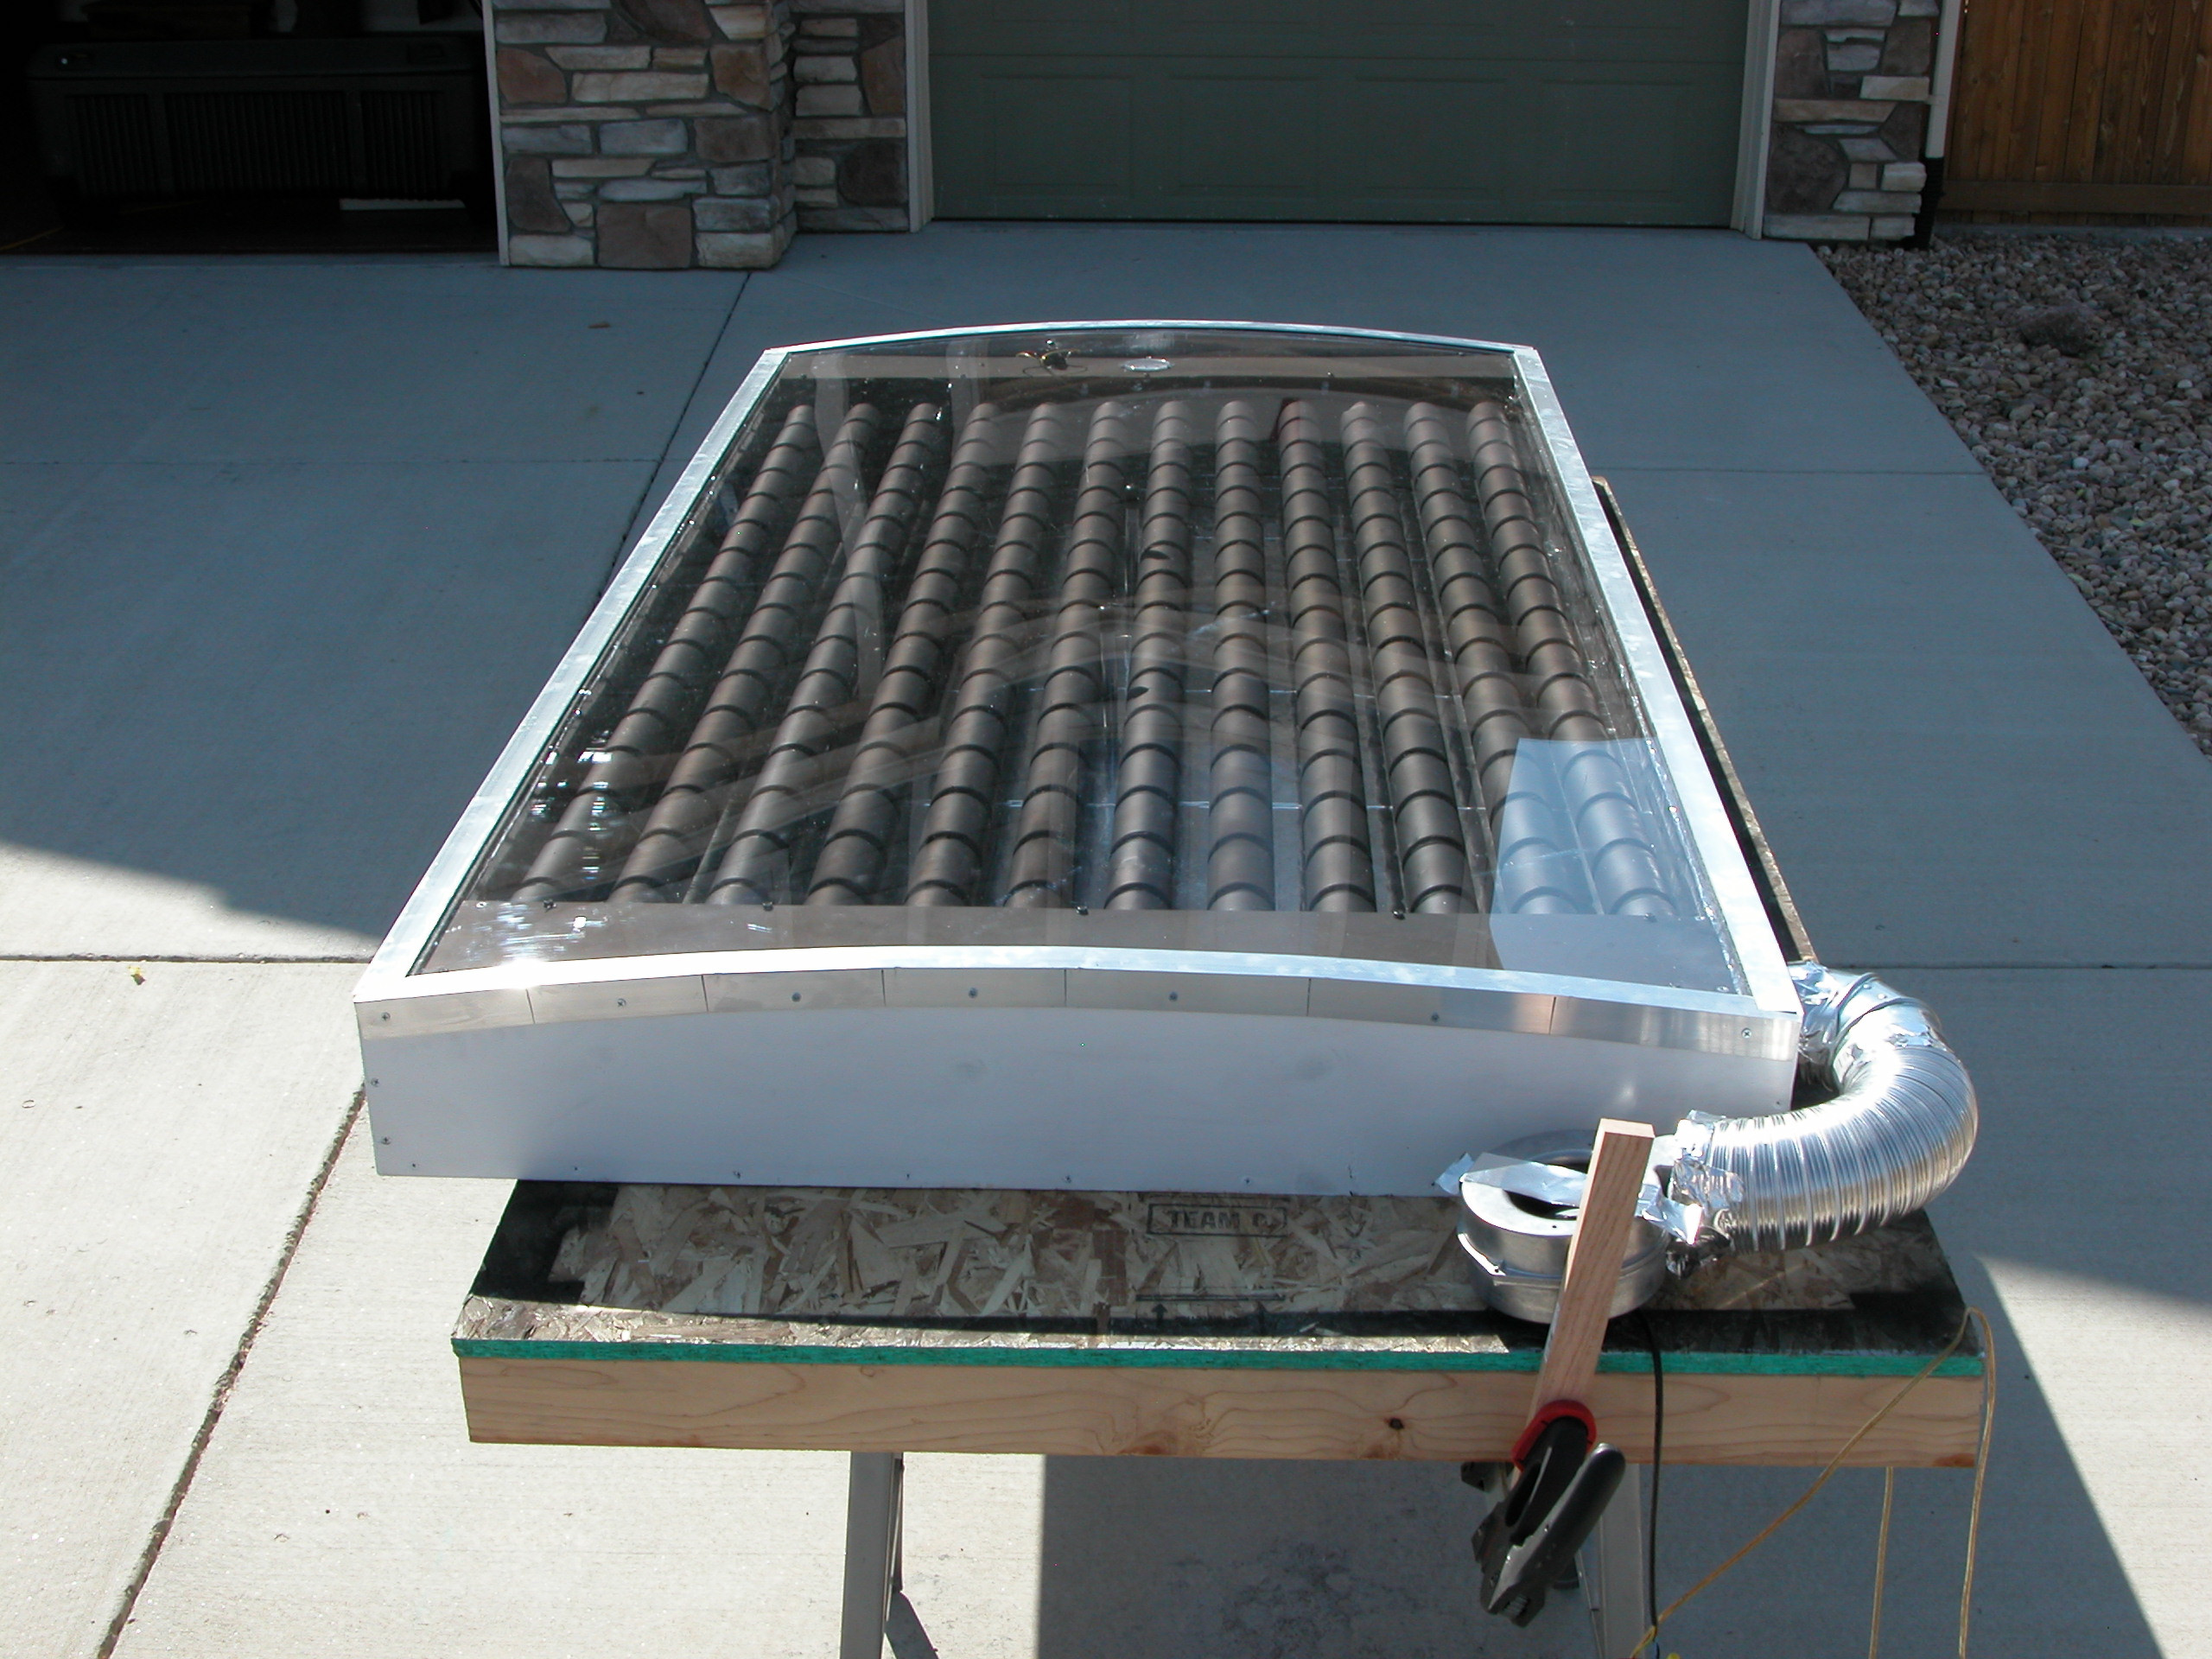 DIY Solar Heating Plans
 9 DIY Handyman Projects To Make The World More Awesome